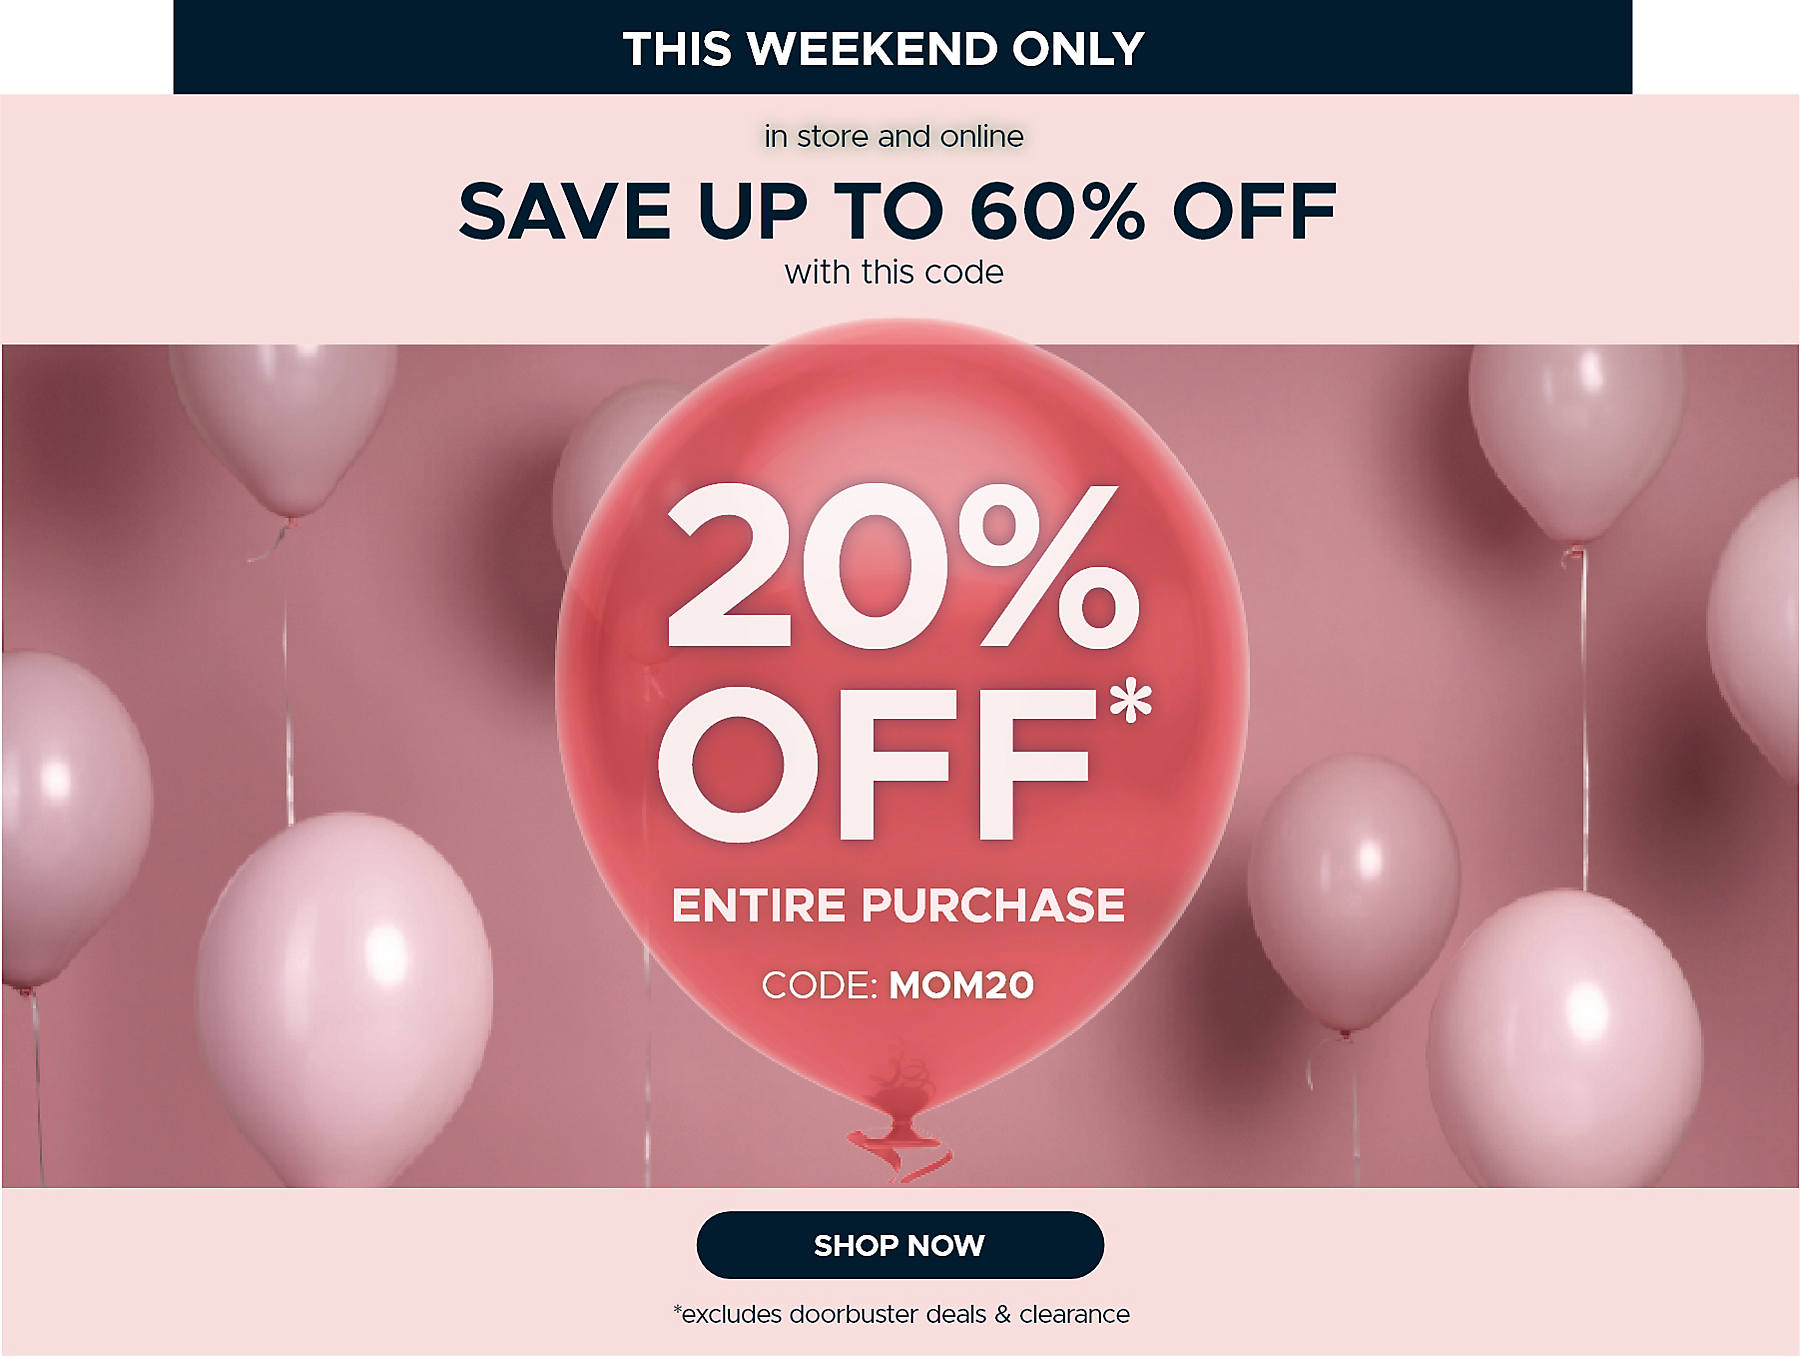 this weekend only in store & online save up to 60% off with this code 20% off* entire purchase code: MOM20 shop now *excludes doorbuster deals & clearance